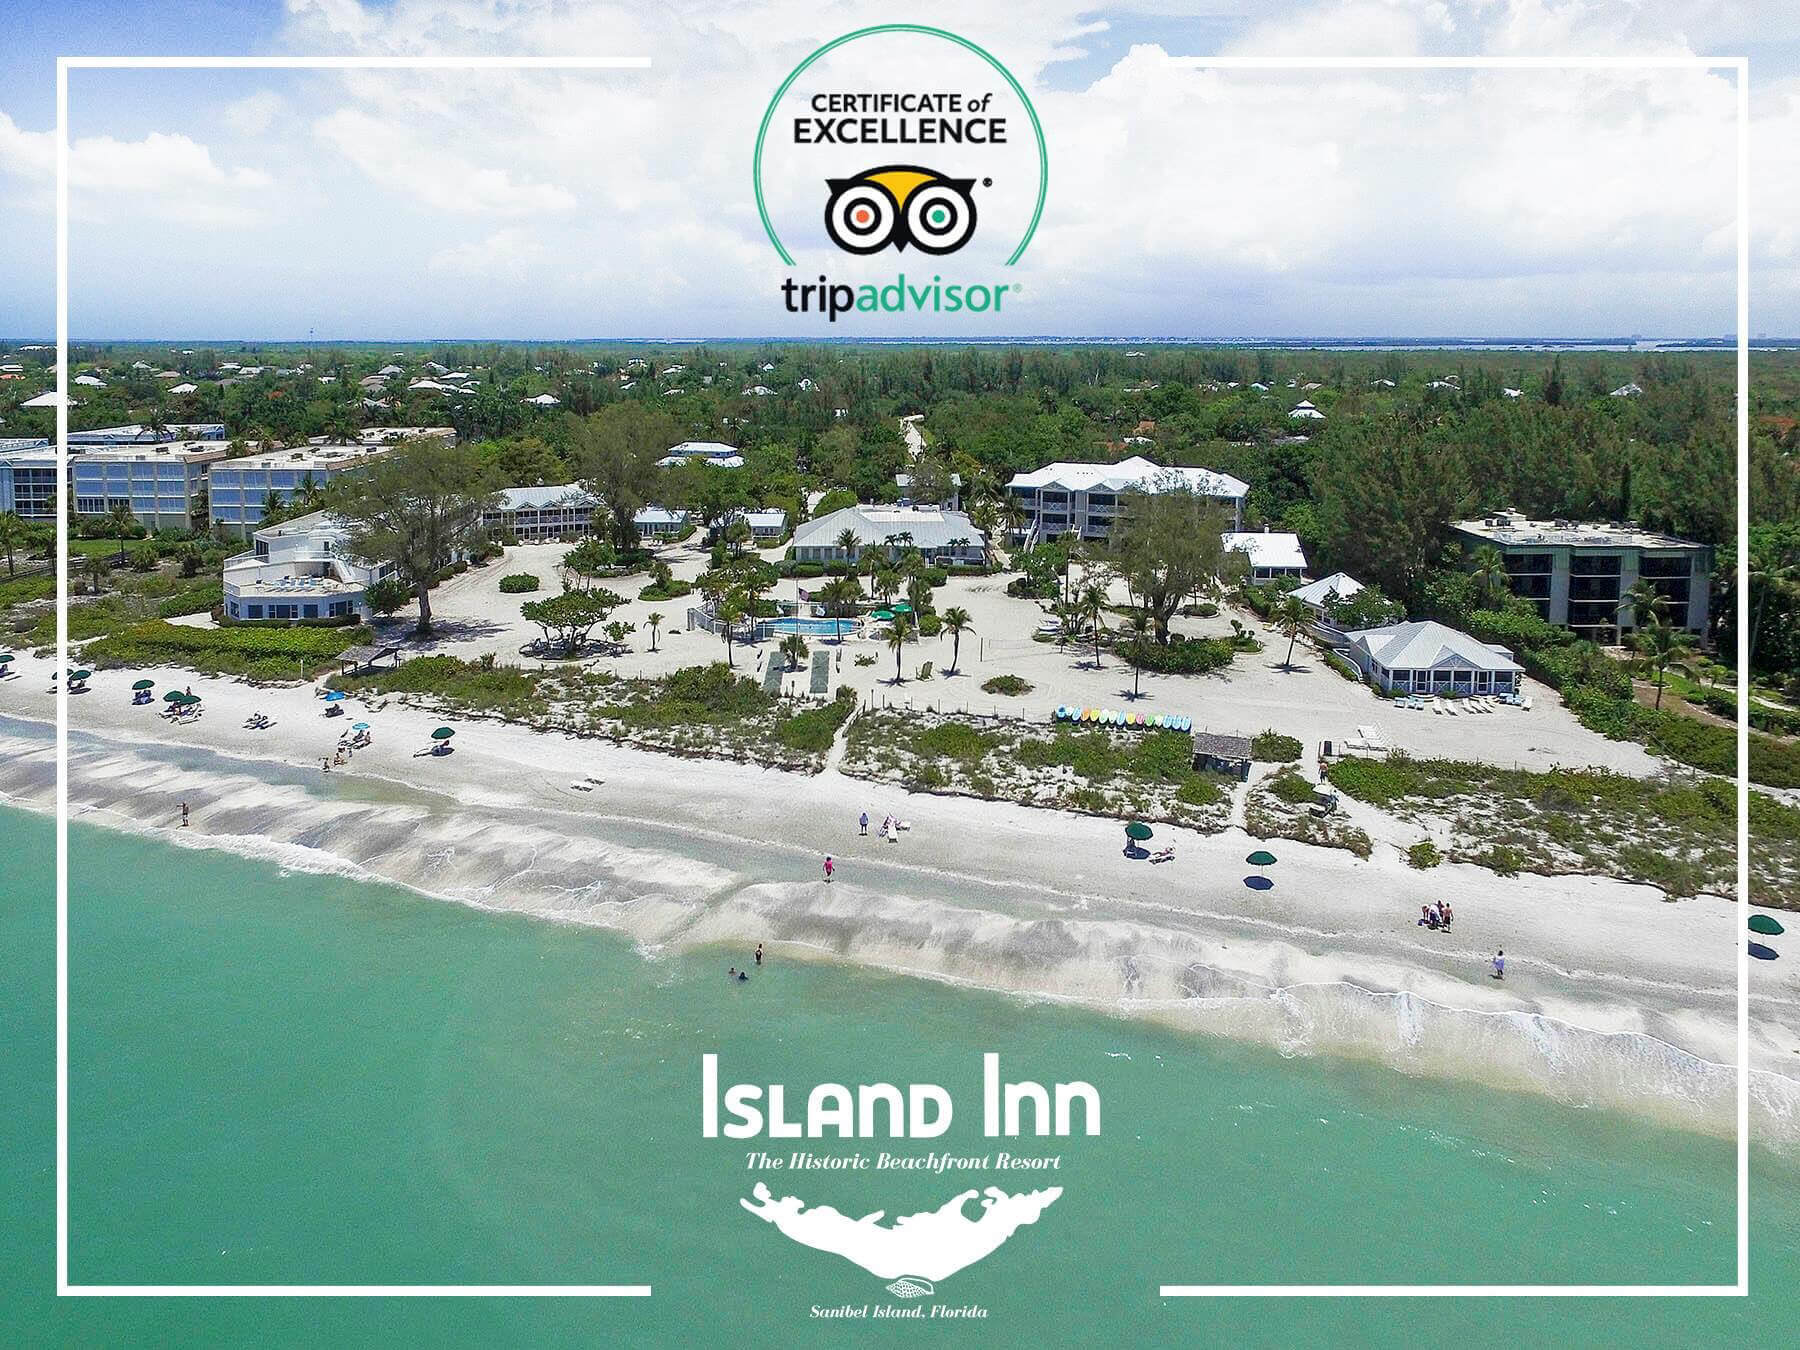 join us at the island inn